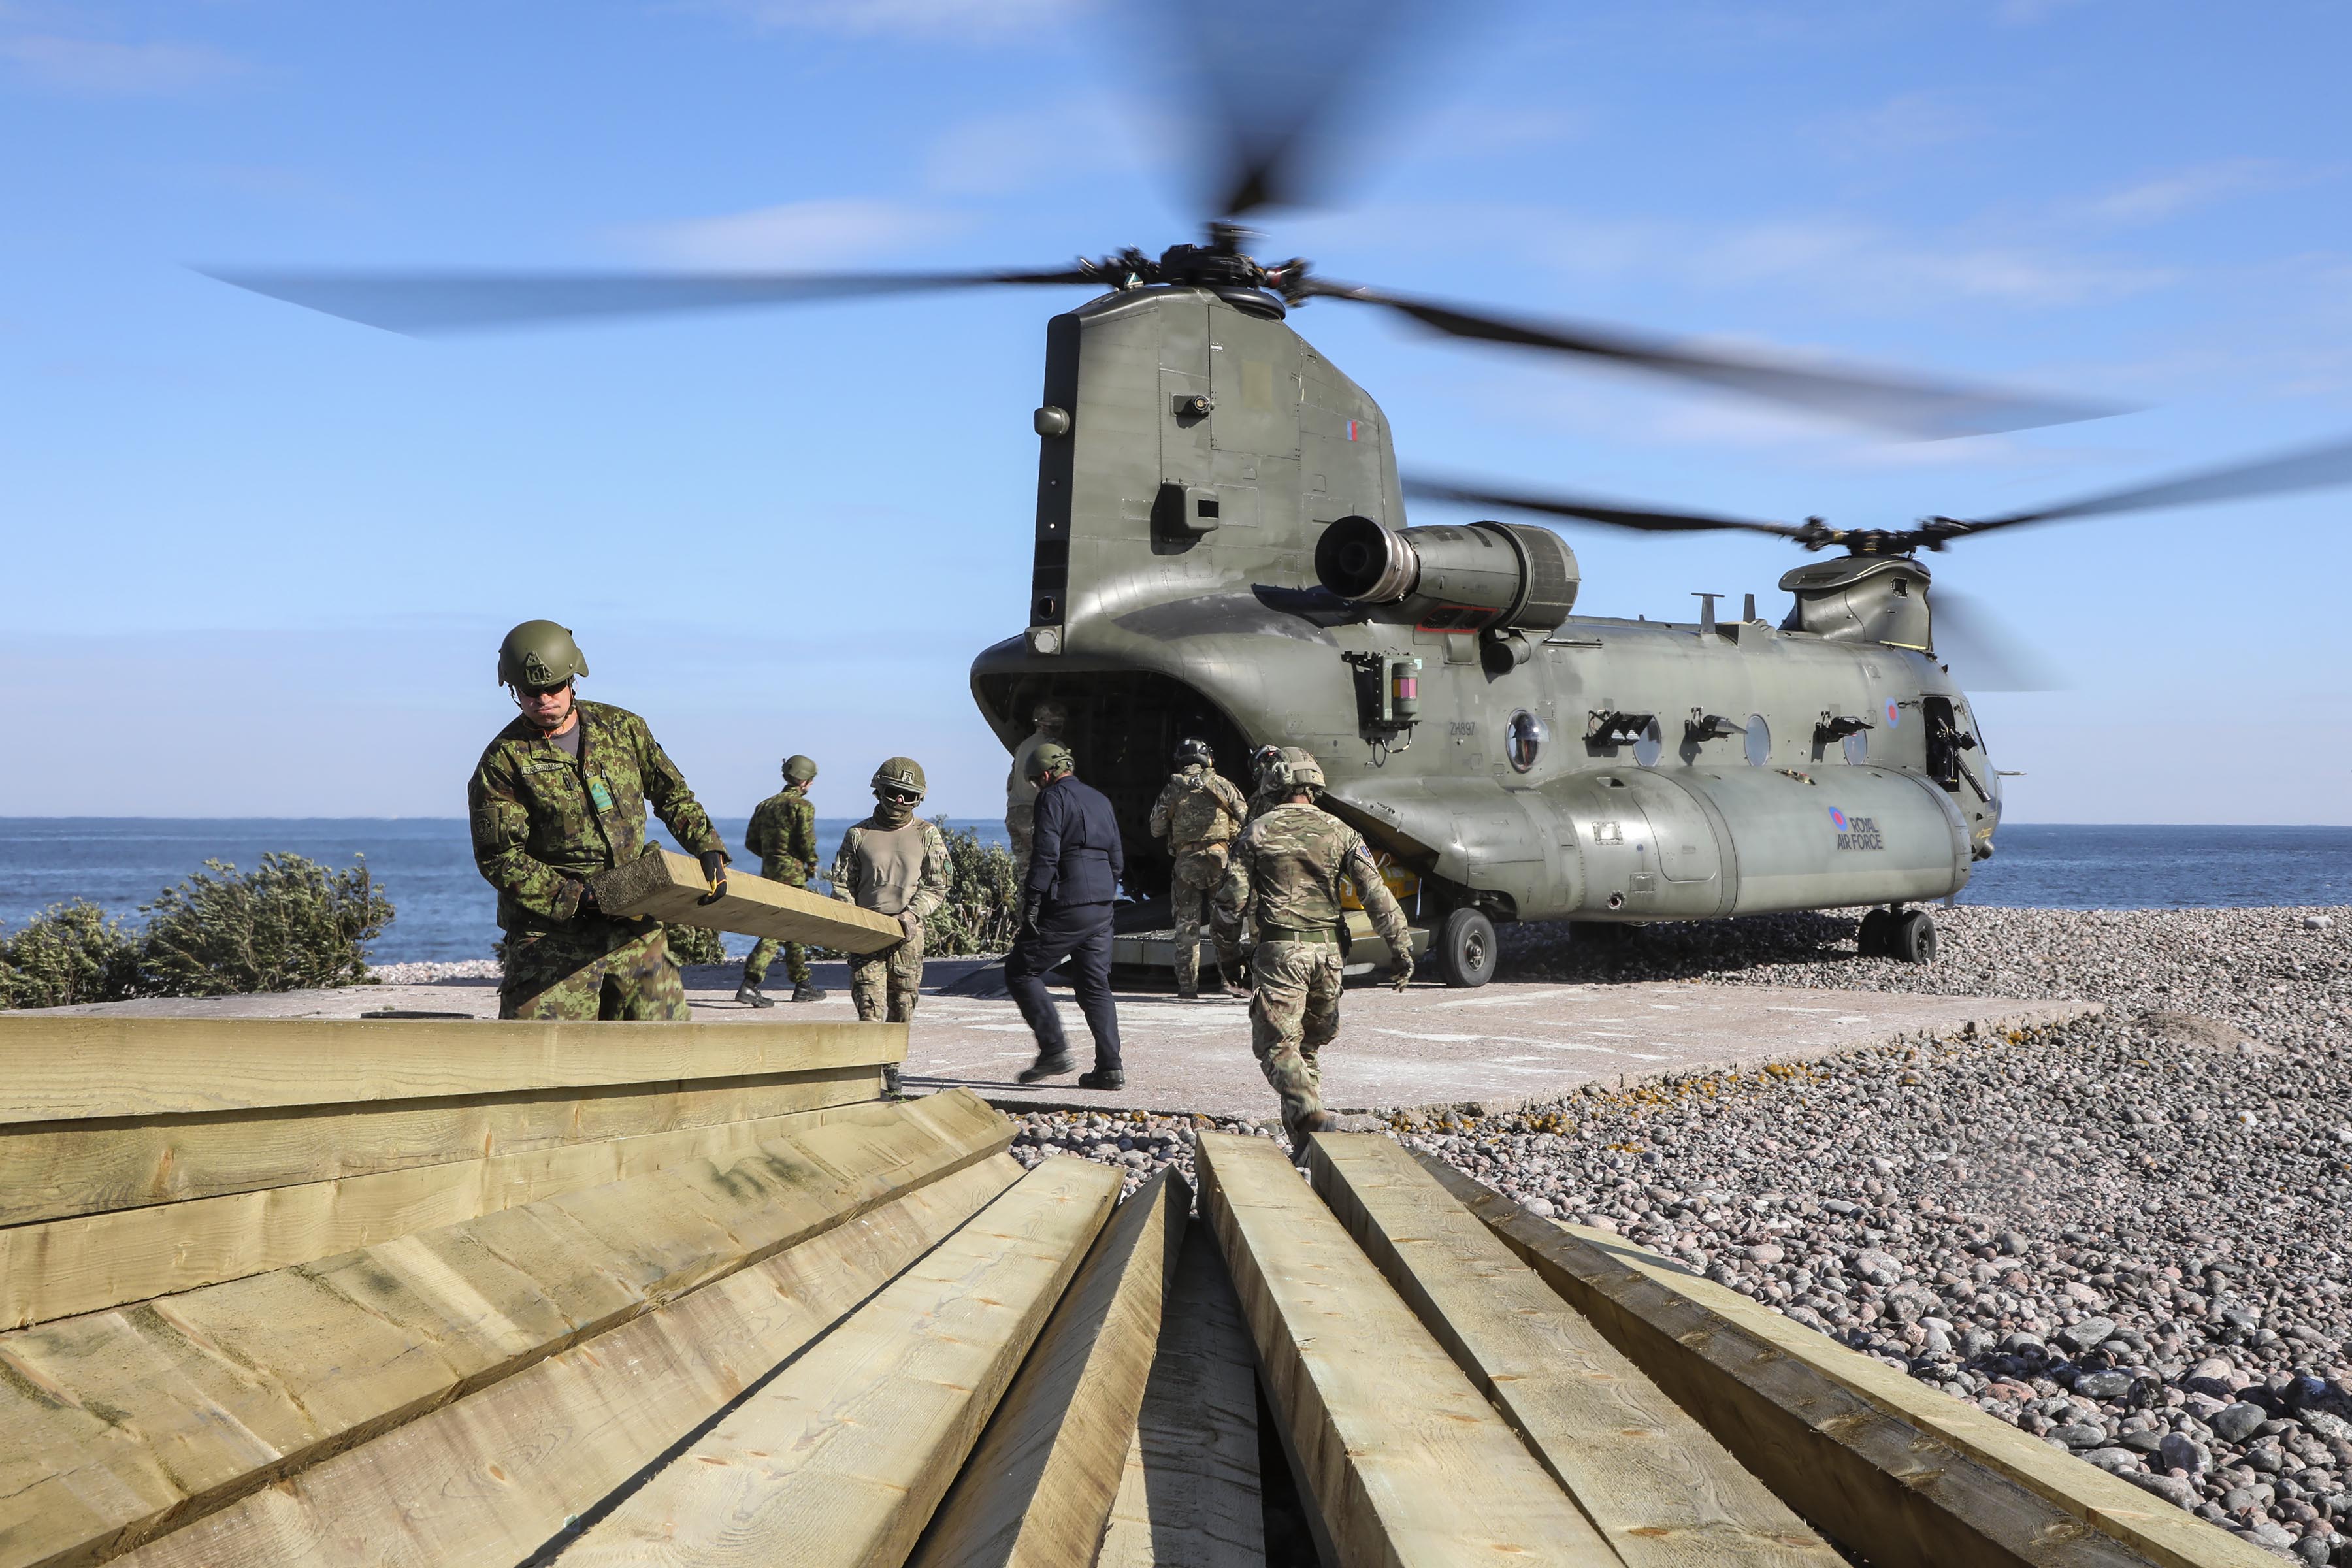 Image shows RAF Regiment moving planks of wood from Chinook, on a beach.